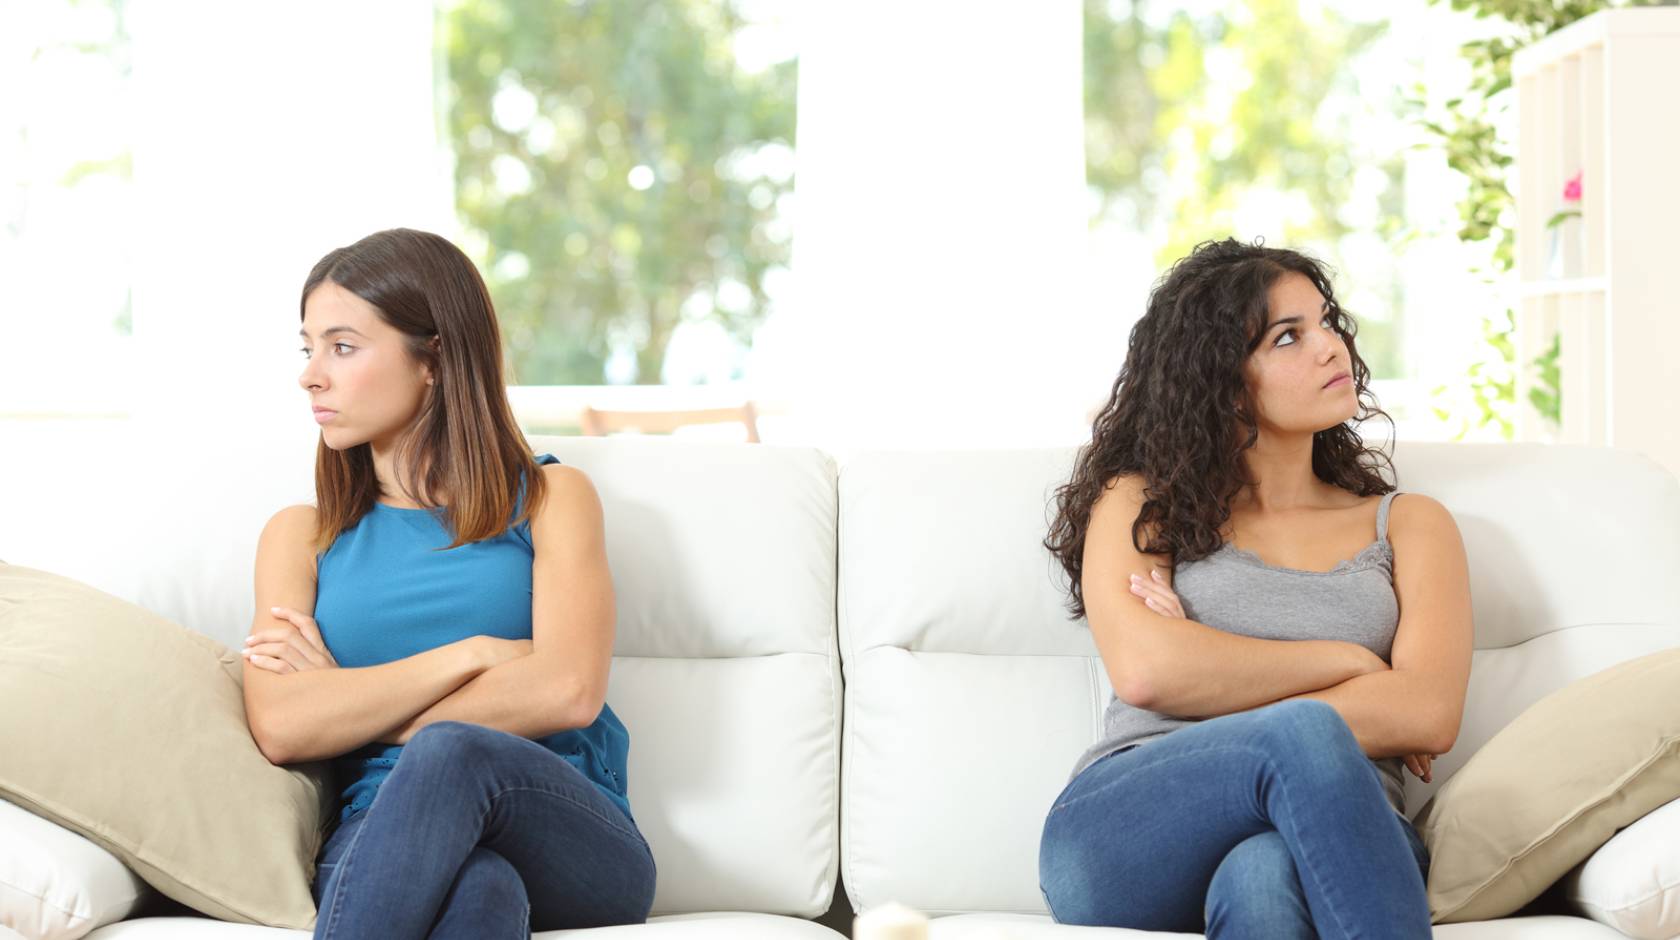 Young women on a couch looking away from each other, arms crossed